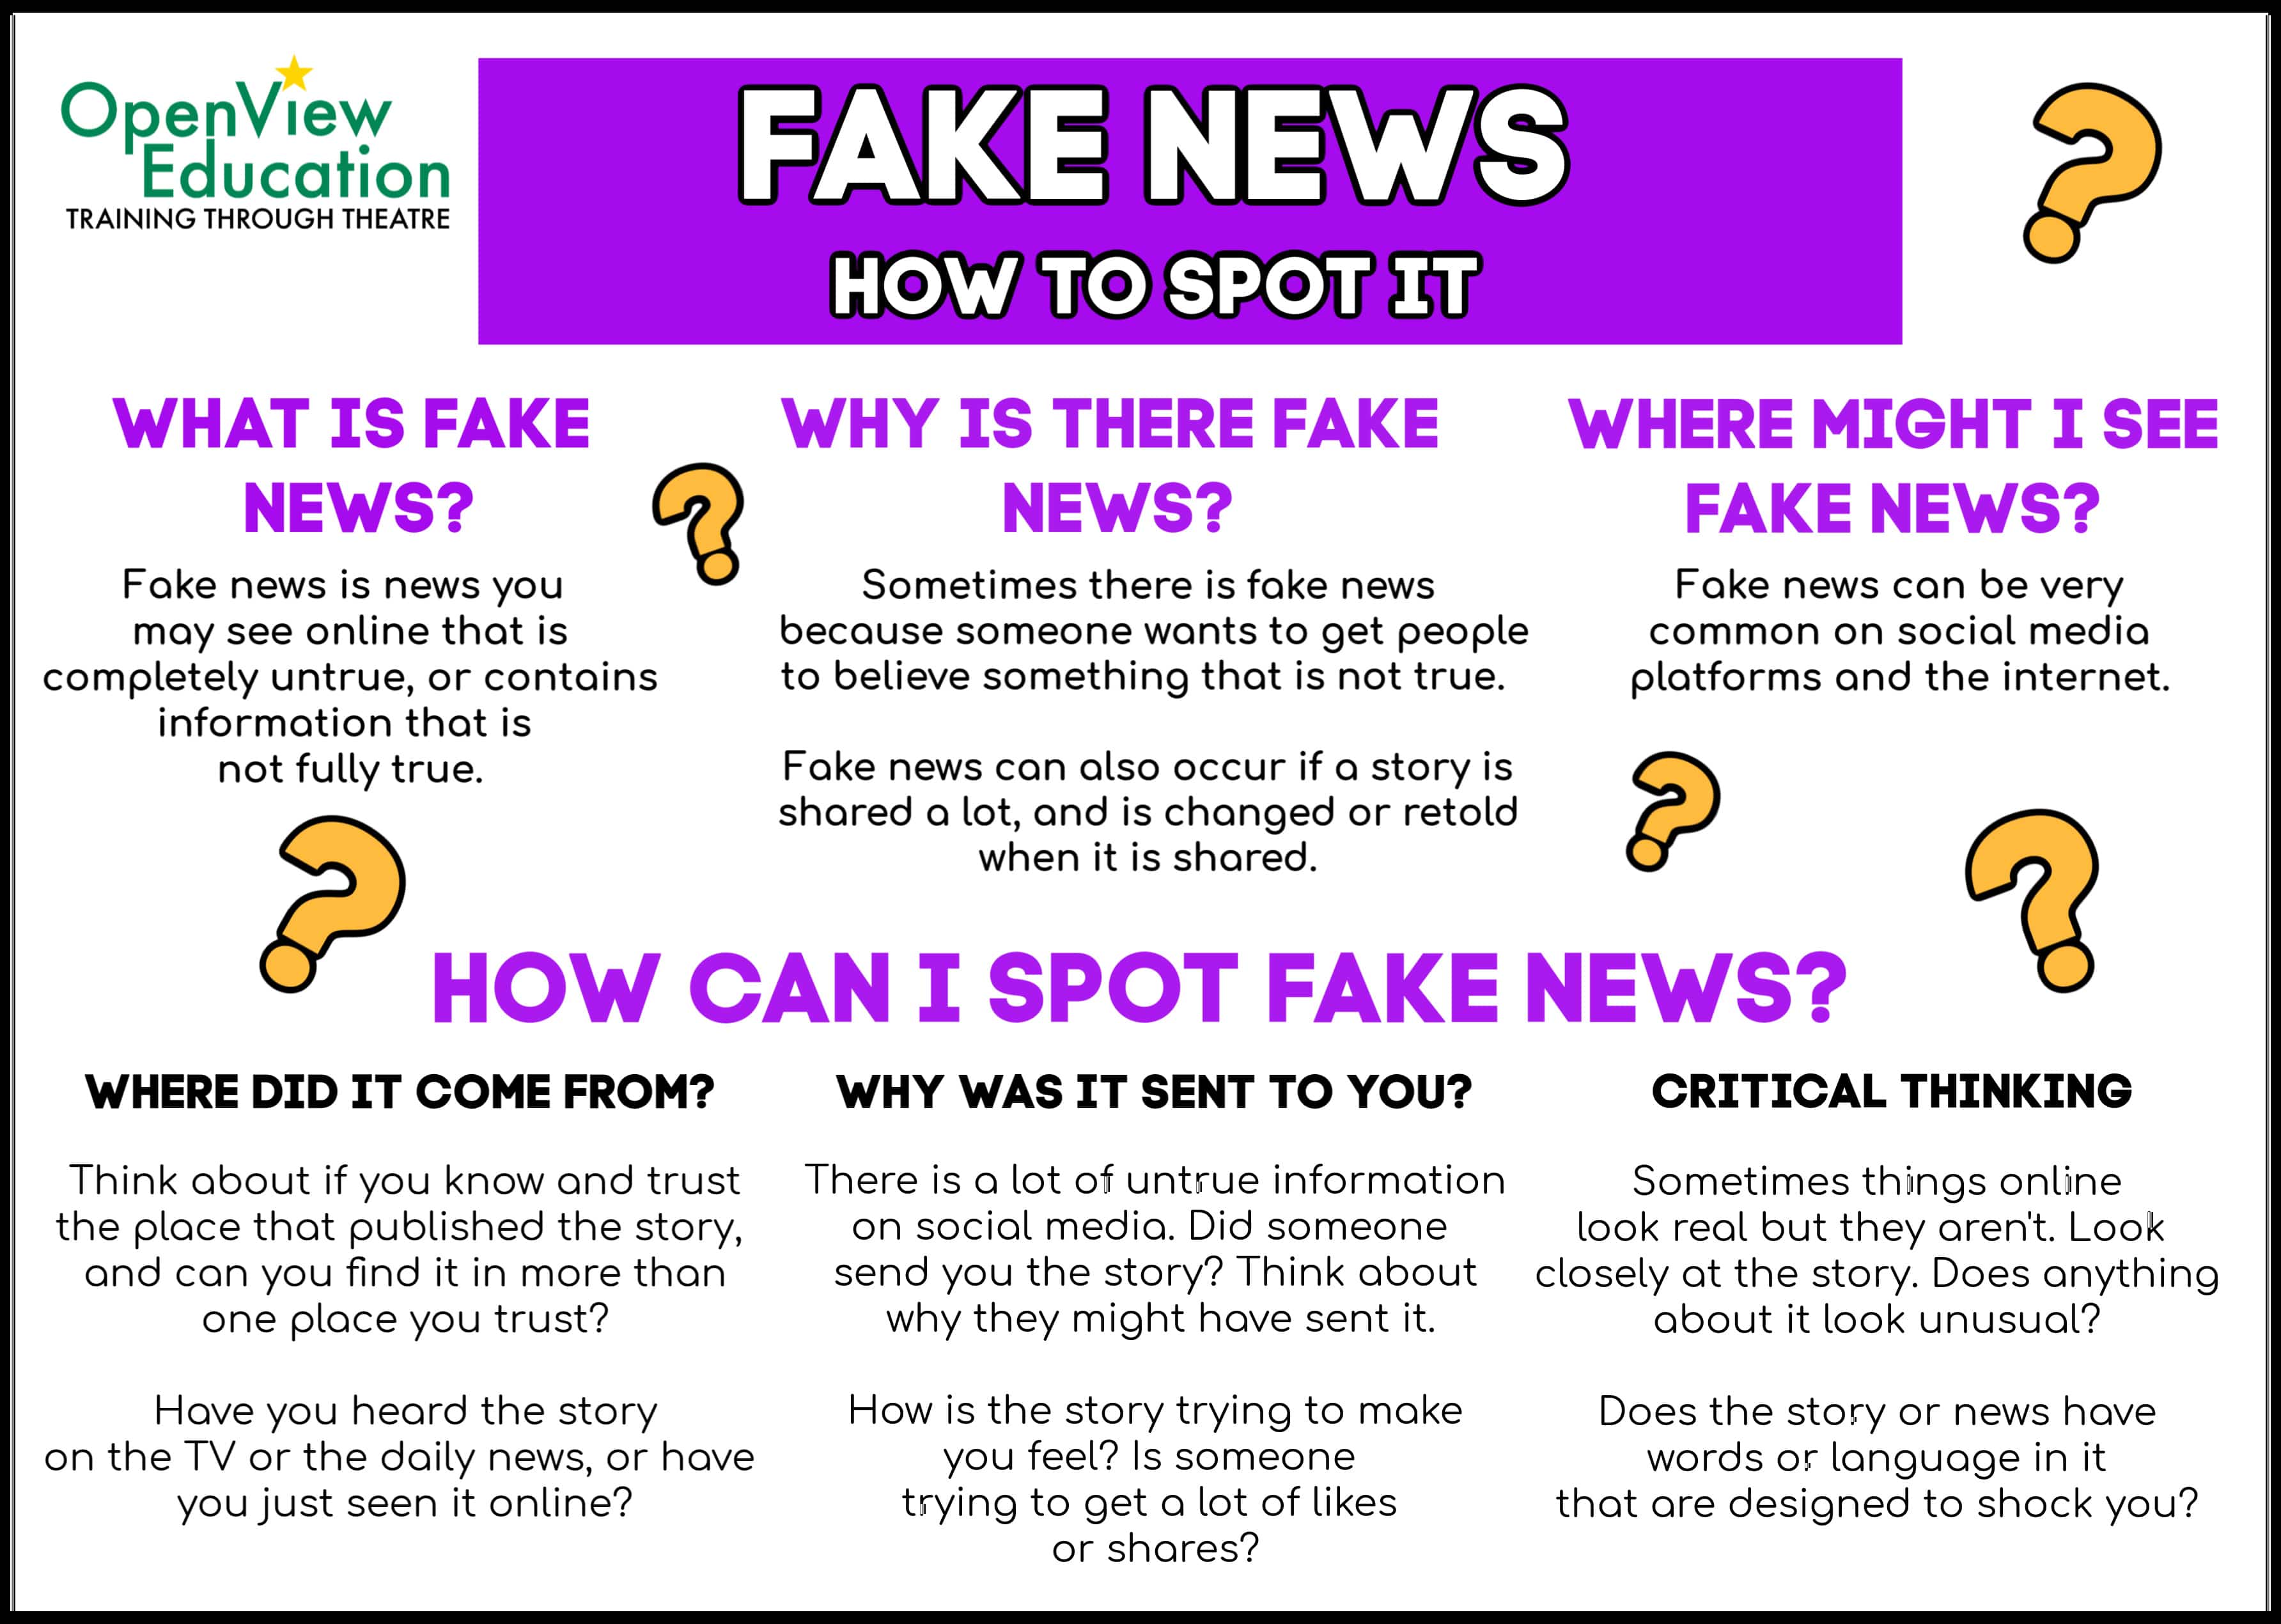 How To Spot Fake News - OpenView Education